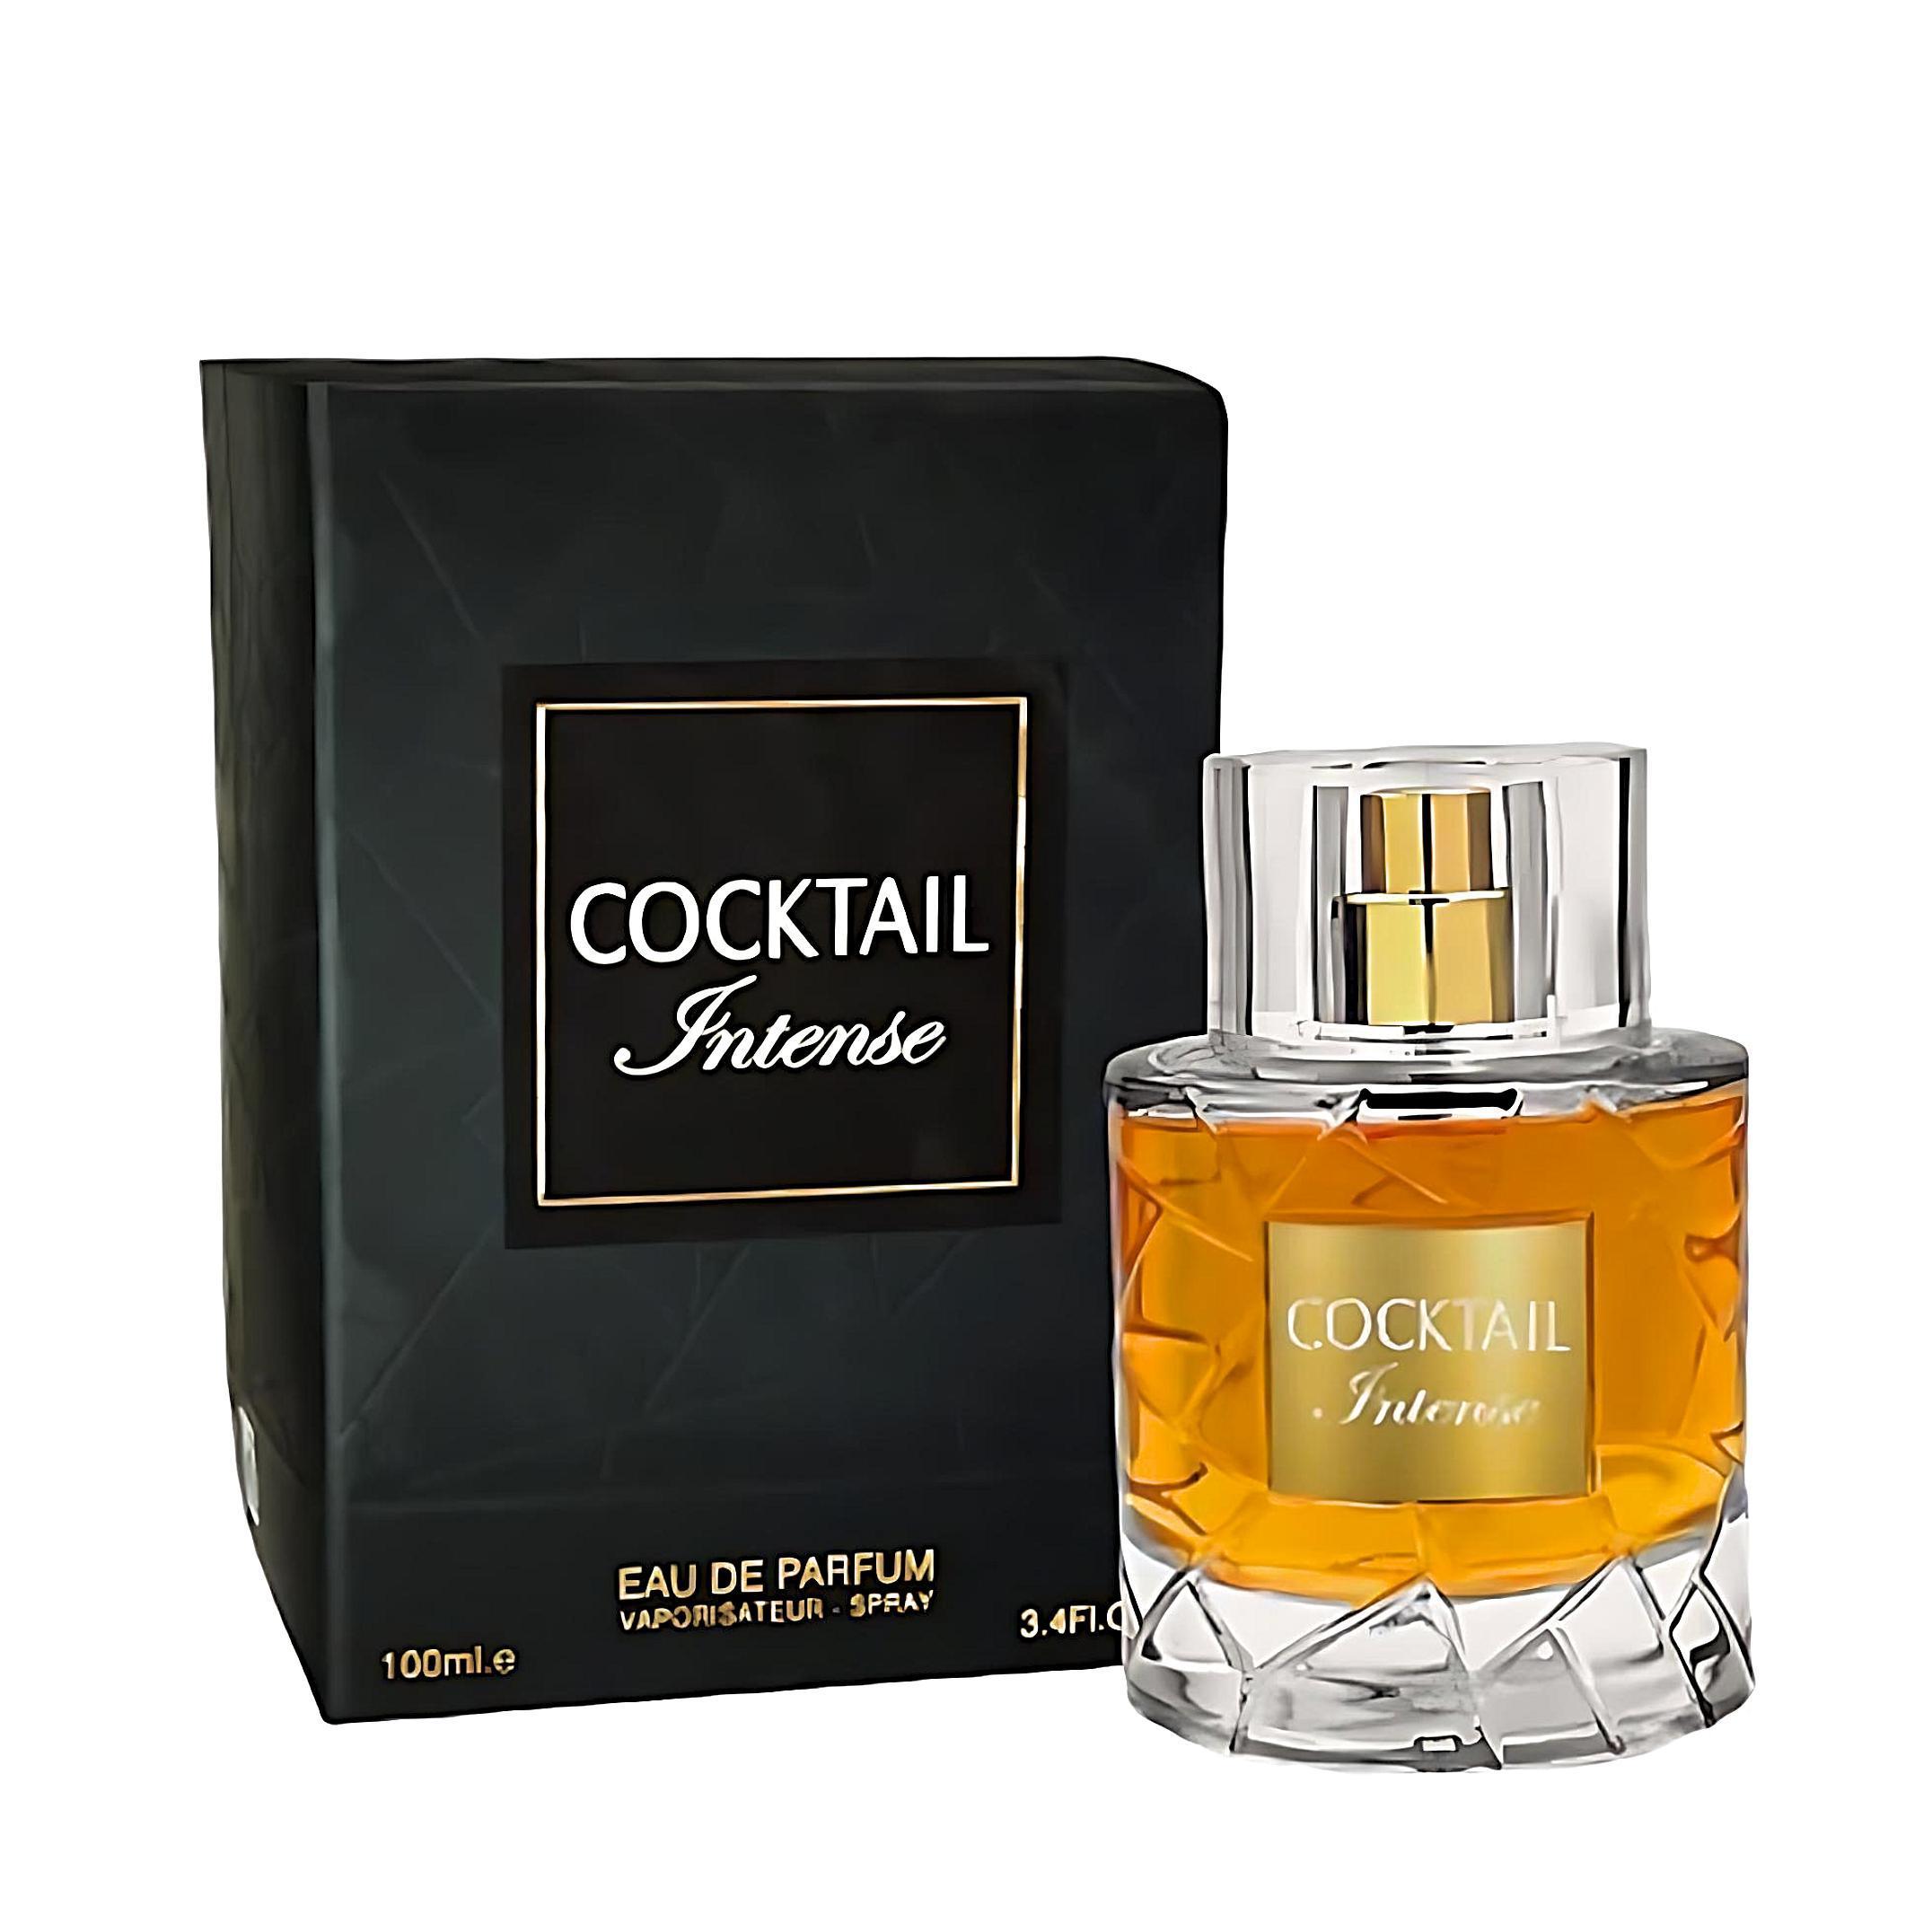 Cocktail Intense Perfume / Eau De Parfum 100Ml By Fragrance World (Inspired By: Angels' Share By Kilian)